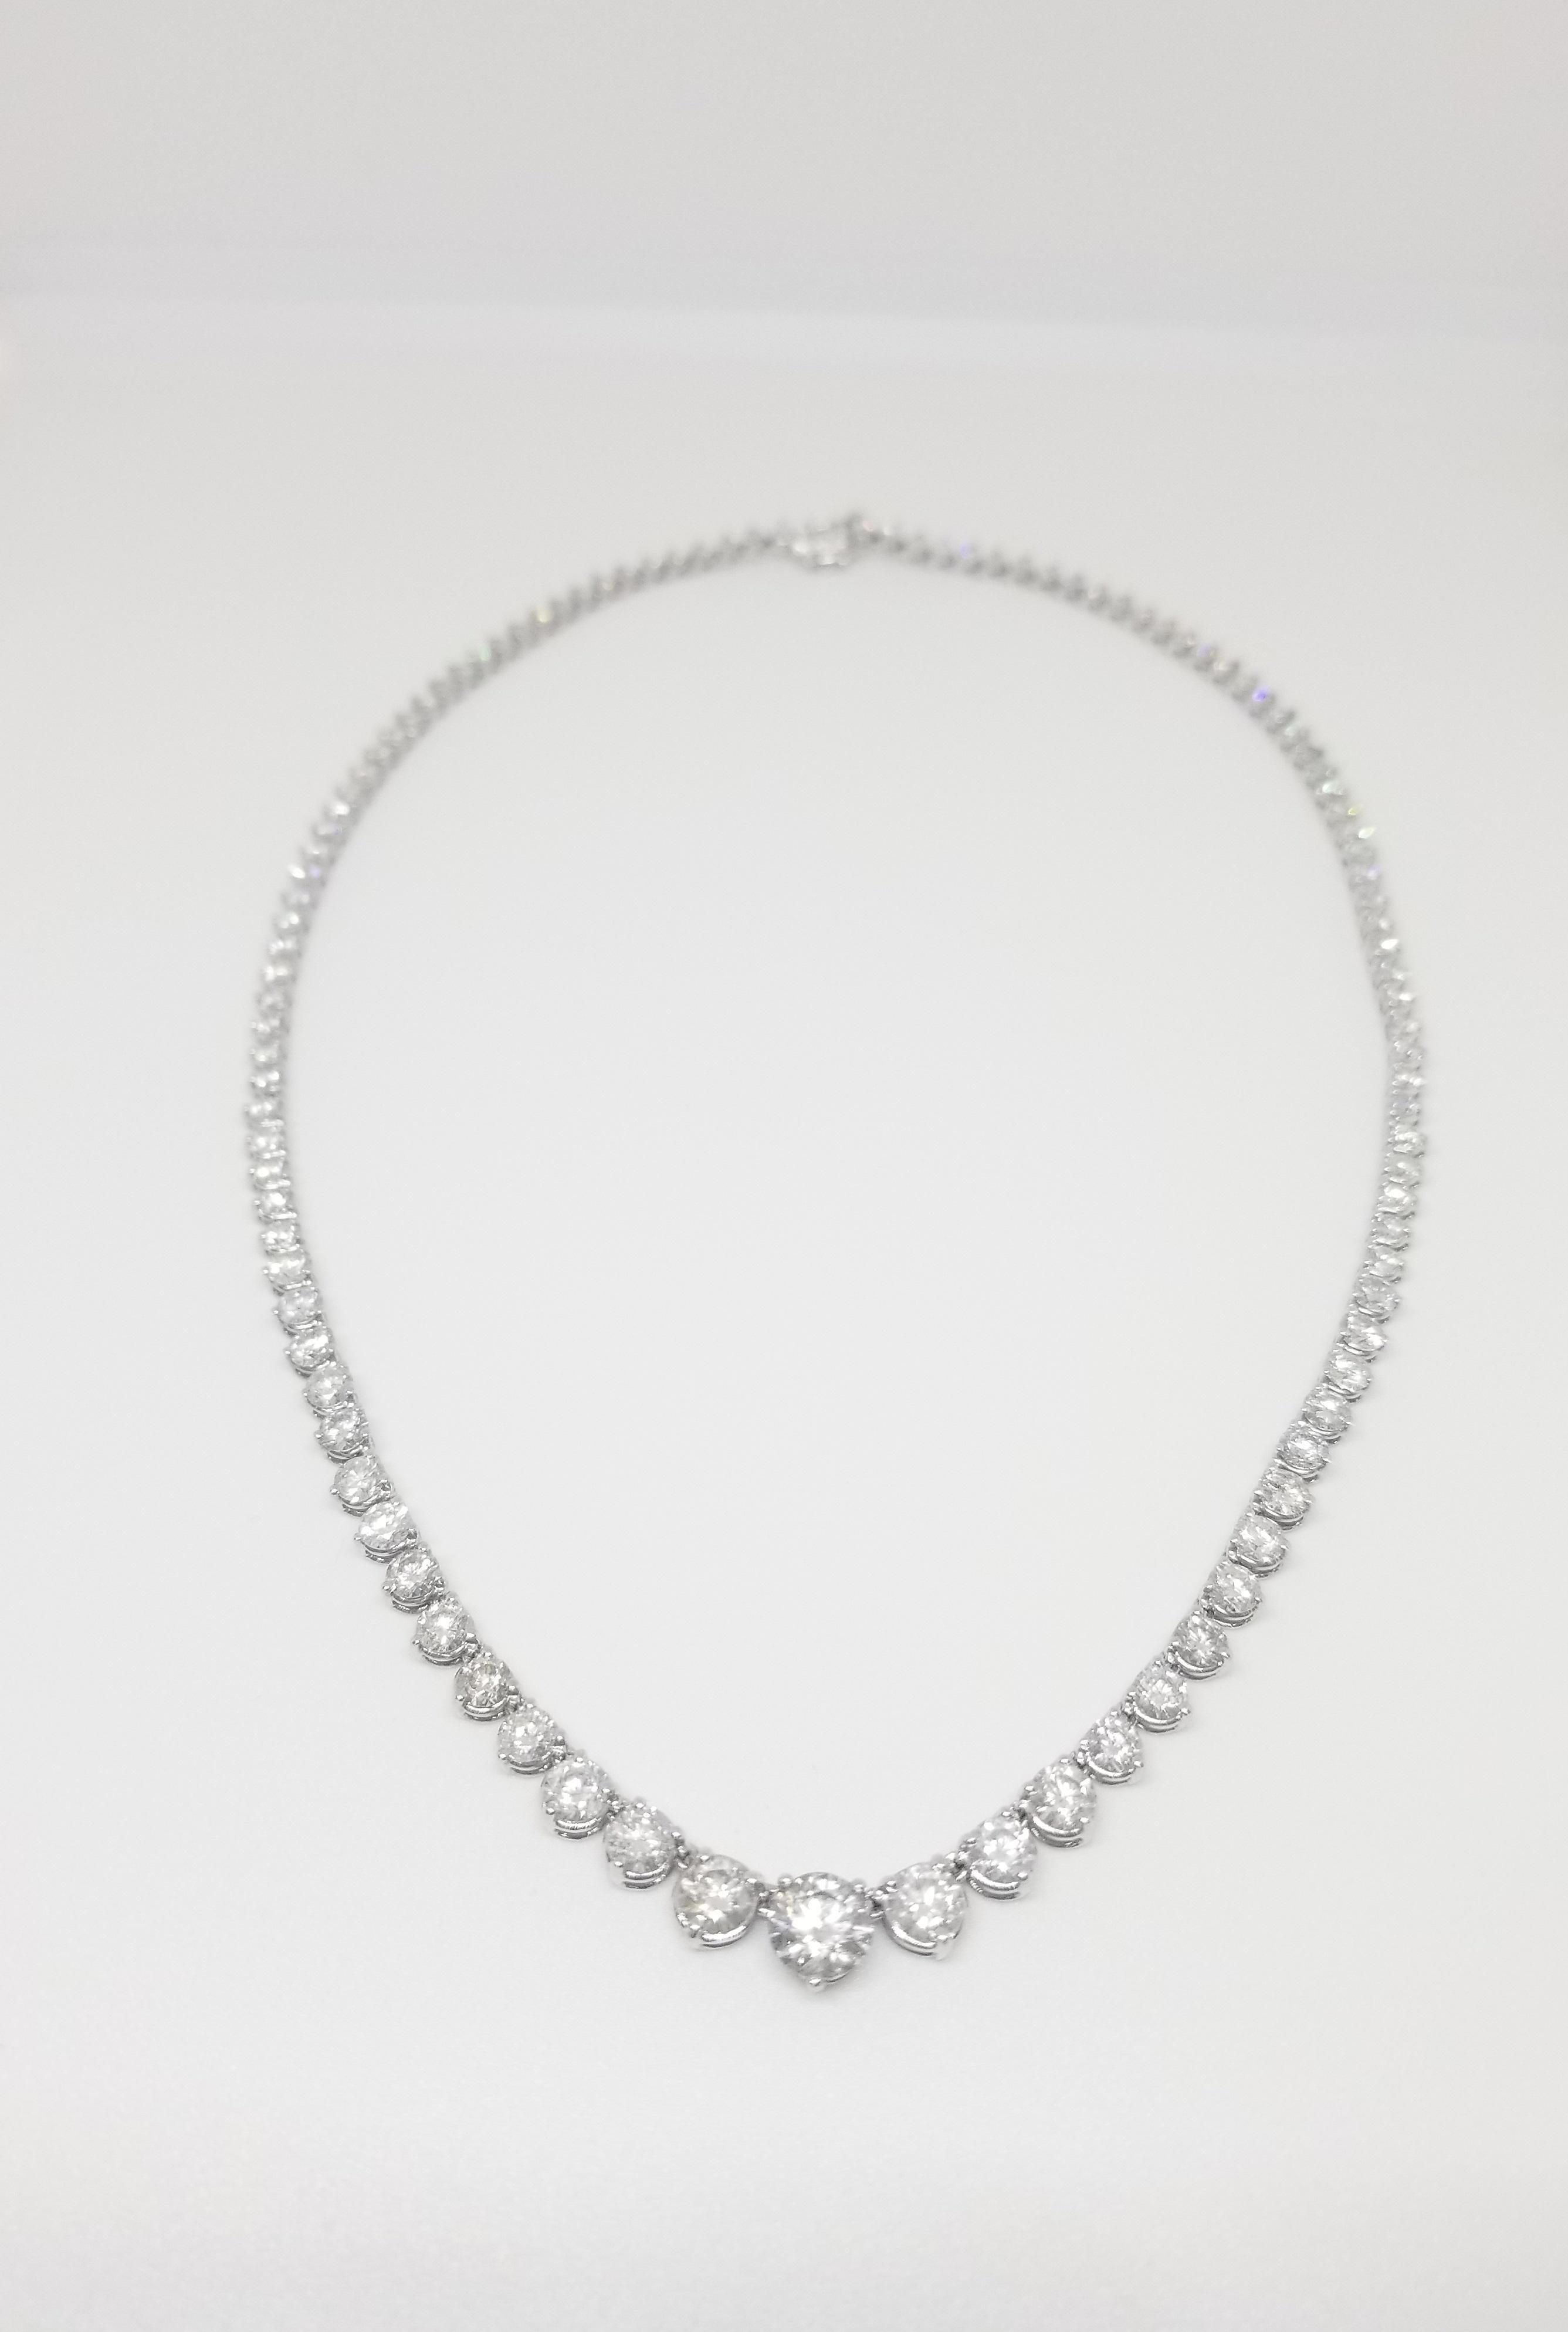 Stunning 14 Karat White Gold Round Brilliant Cut Diamond Tennis Necklace set on 3- prong setting. The total diamond weight is 8.72 carats. The closure is an insert clasp with safety clasp. Length is 16 inches. center stone 0.60ct. VERY SHINY EYE